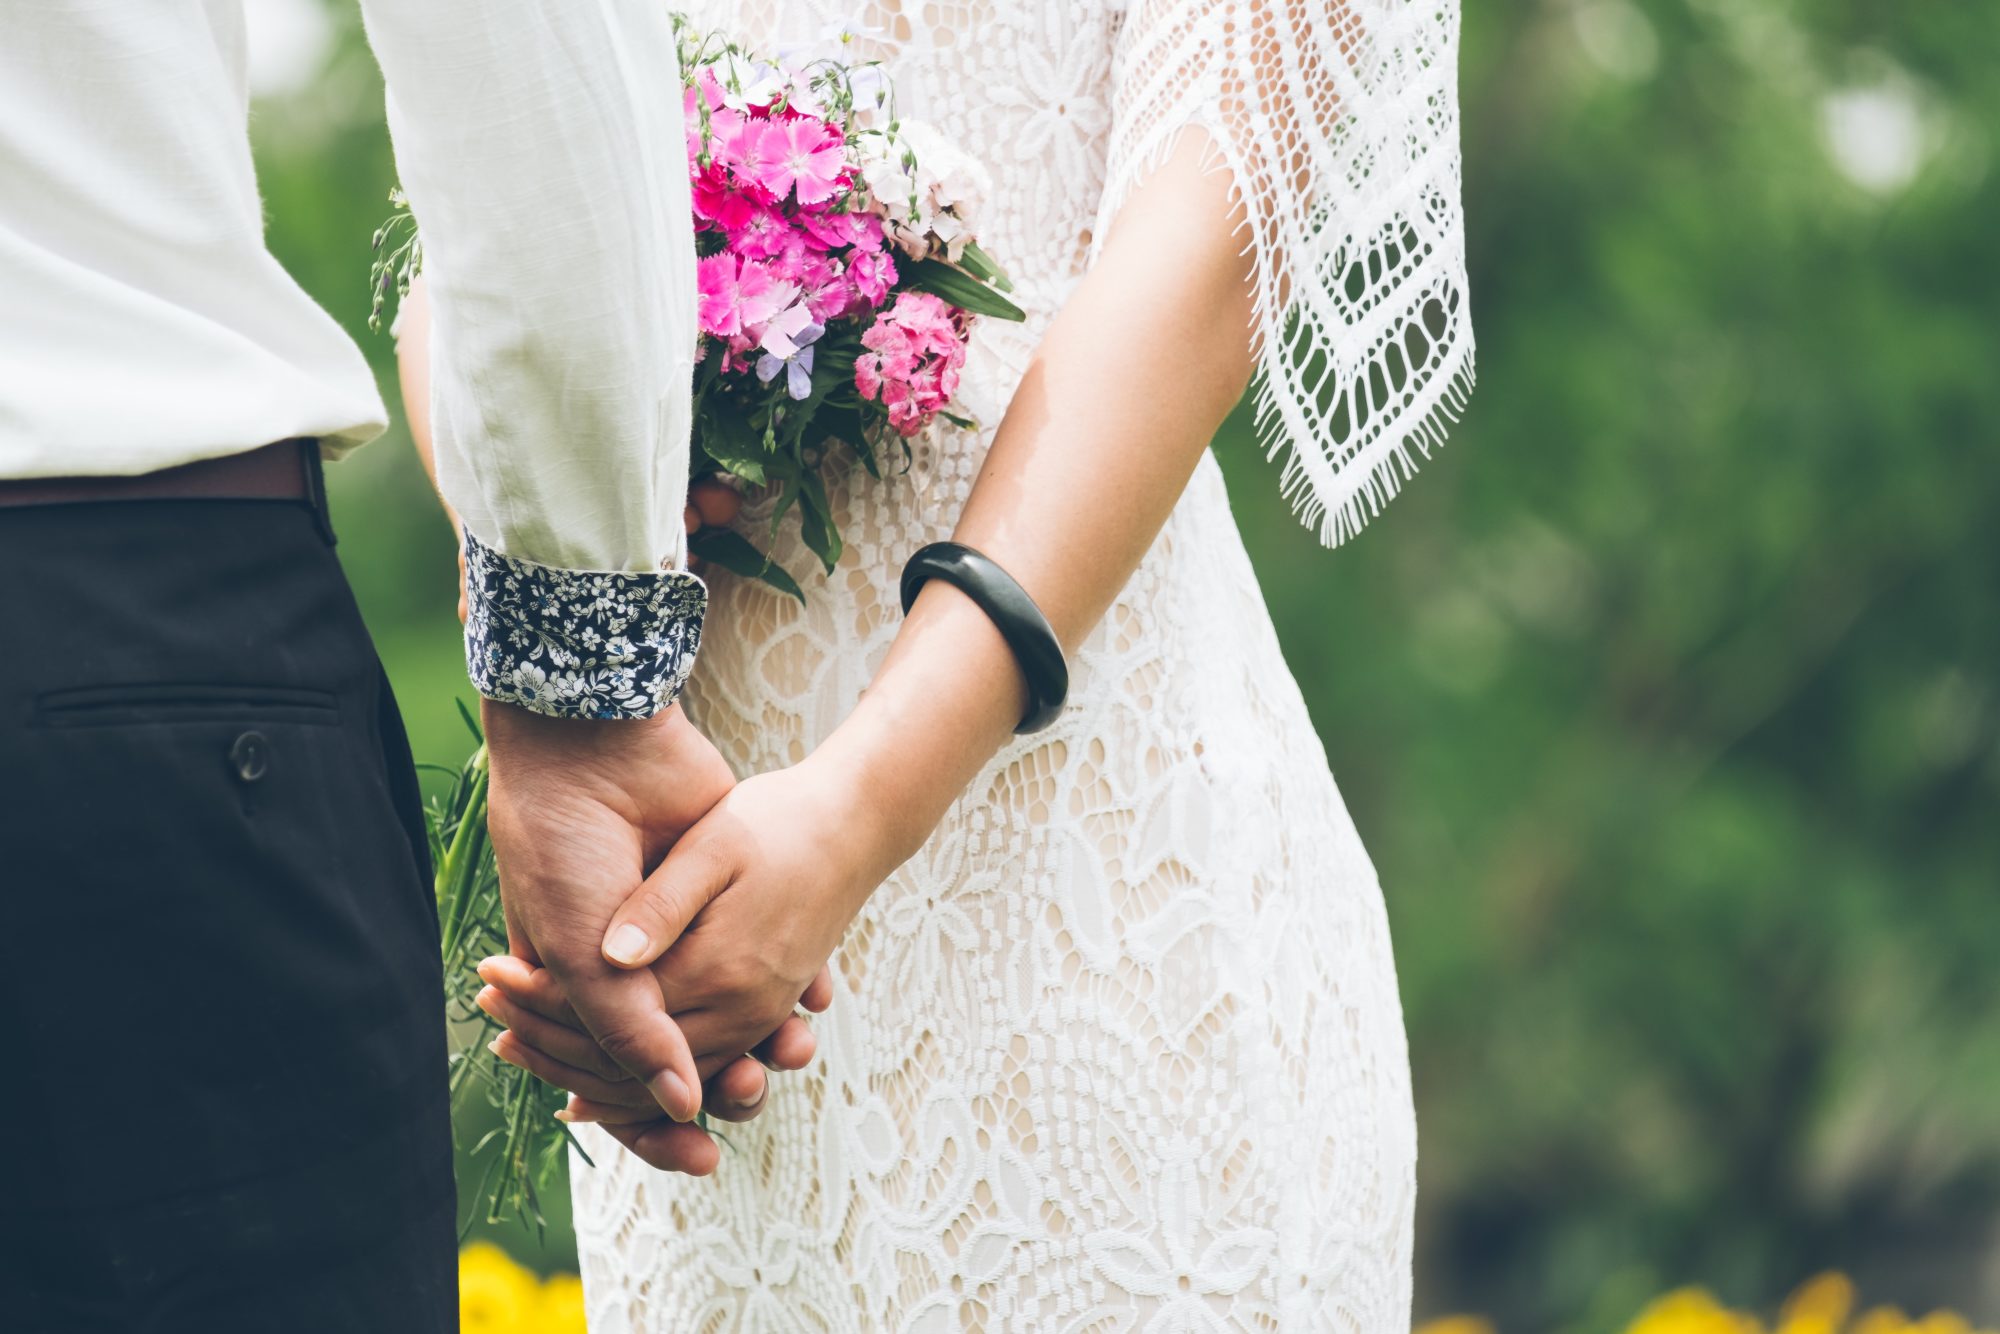 10 Financial Tips for Newlyweds